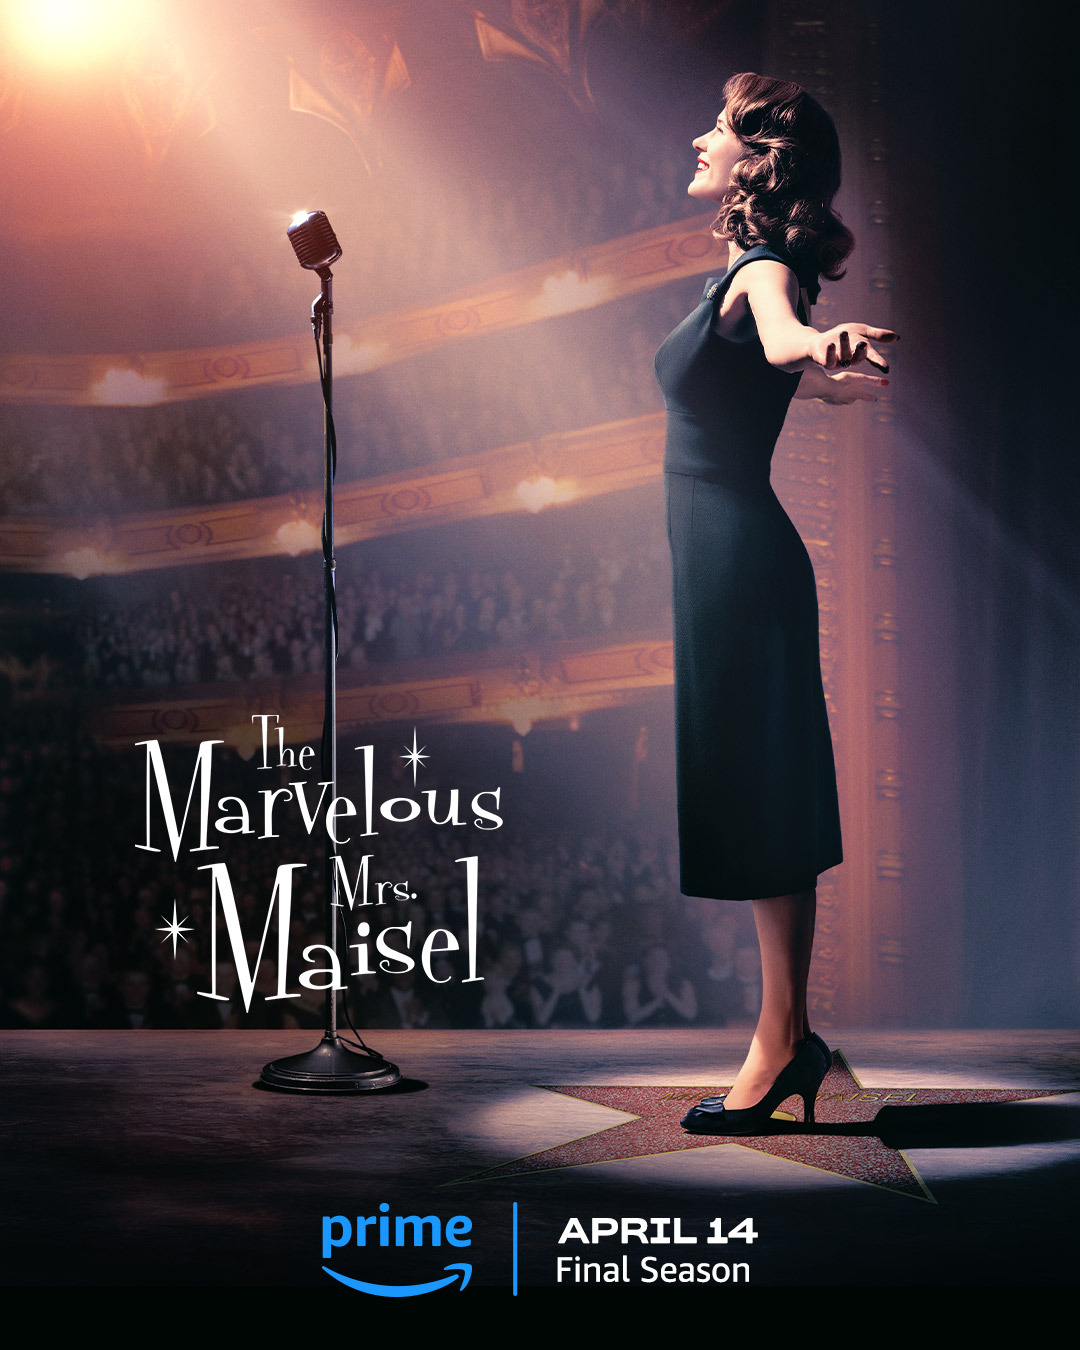 Extra Large TV Poster Image for The Marvelous Mrs. Maisel (#15 of 16)